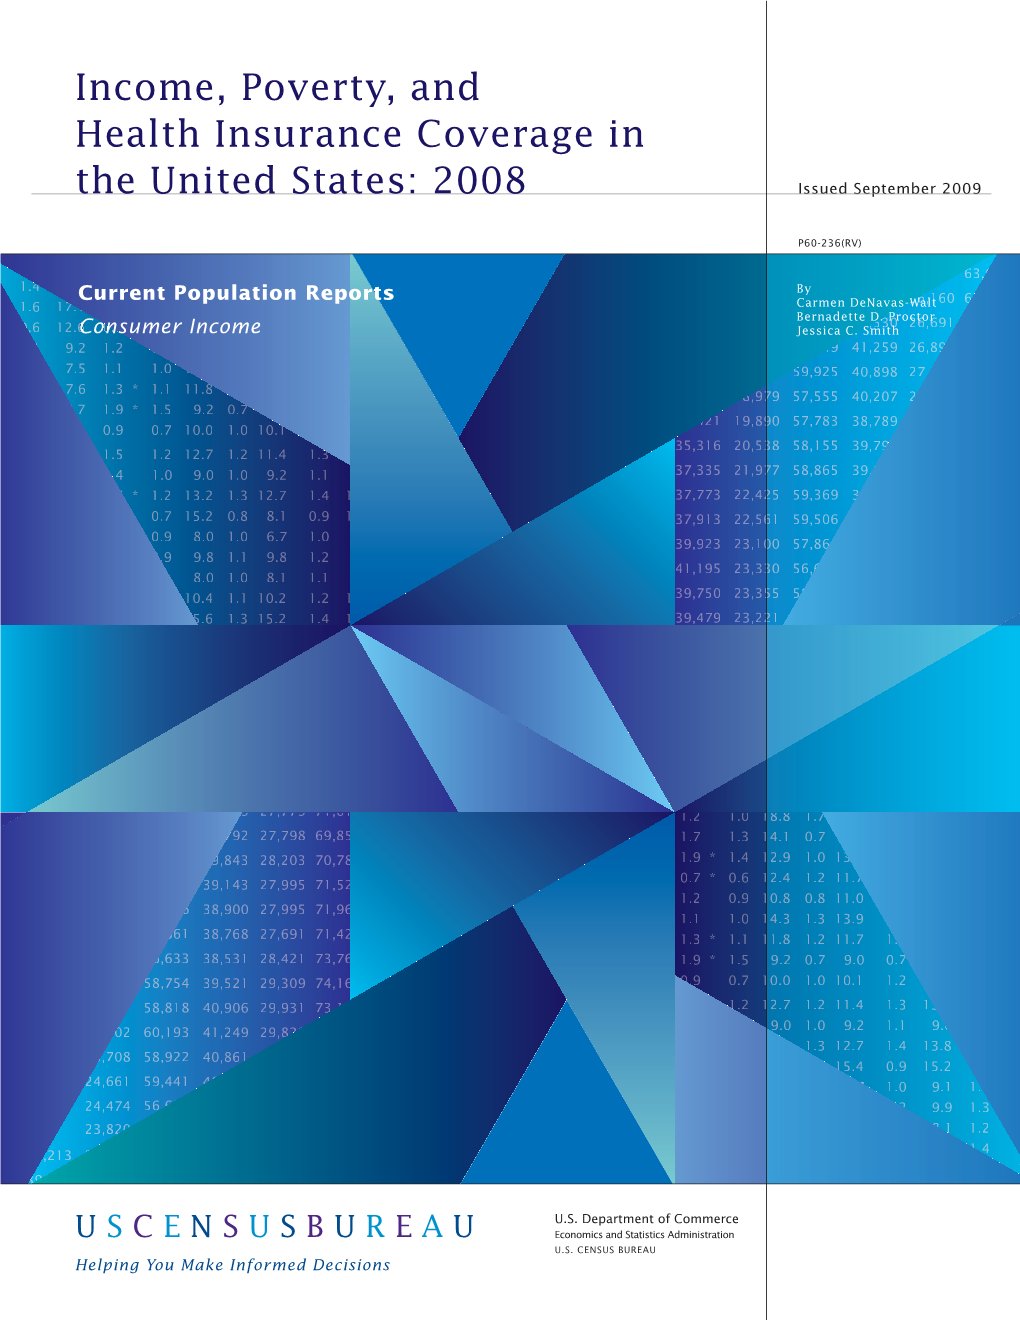 Income, Poverty, and Health Insurance Coverage in the United States: 2008, U.S